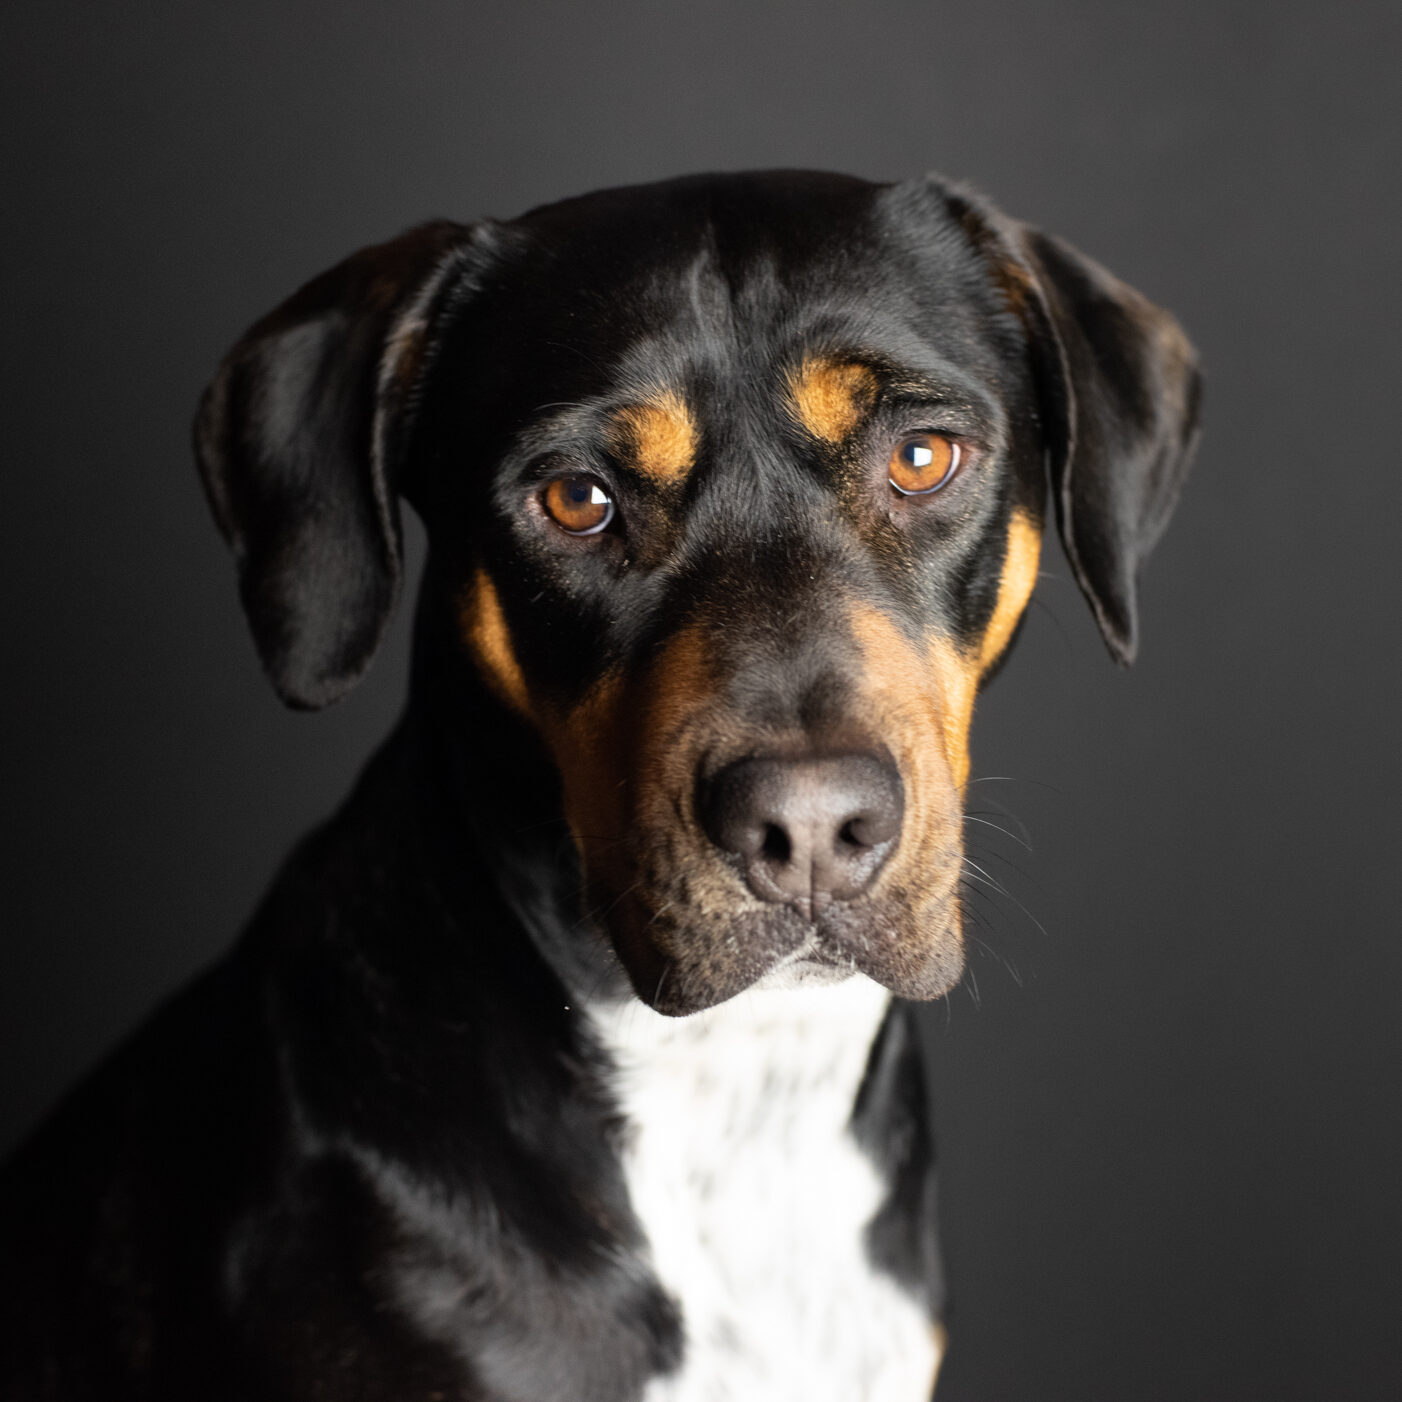 a portrait of a black dog with white undercoat and brown on his face posing for the camera